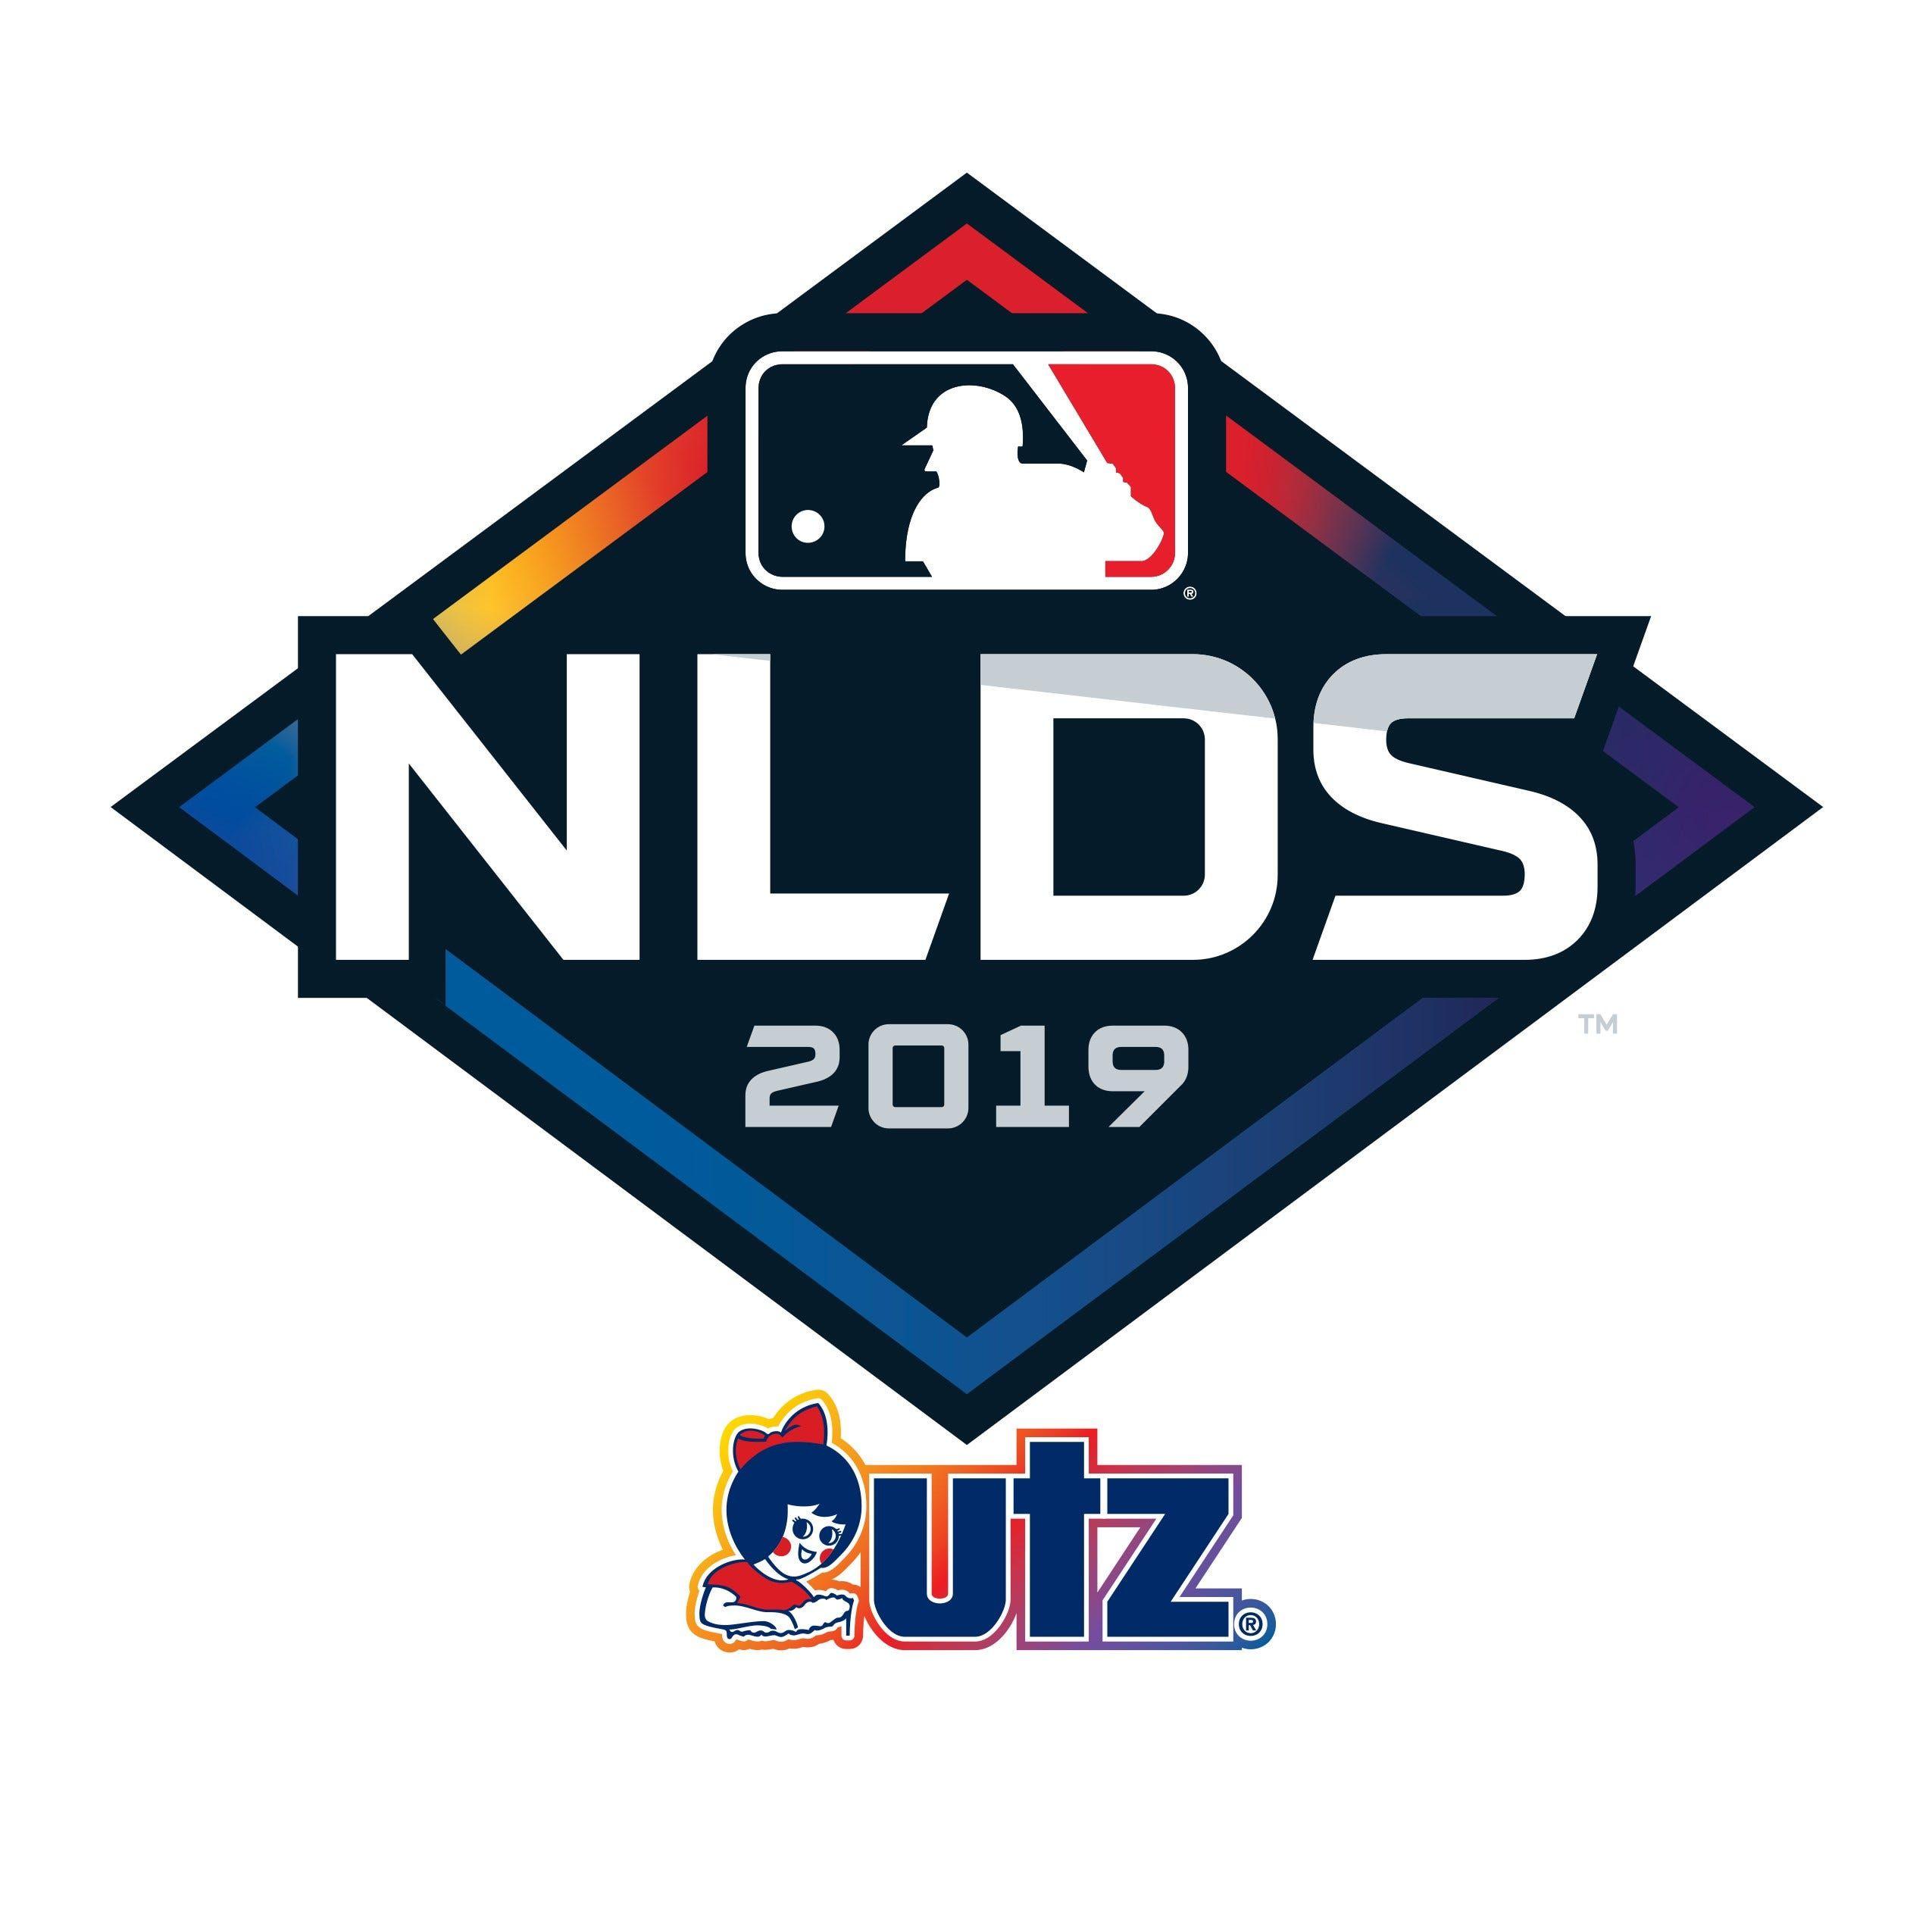 Utz Logo - Utz® To Be Presenting Sponsor of The National League Division Se ...